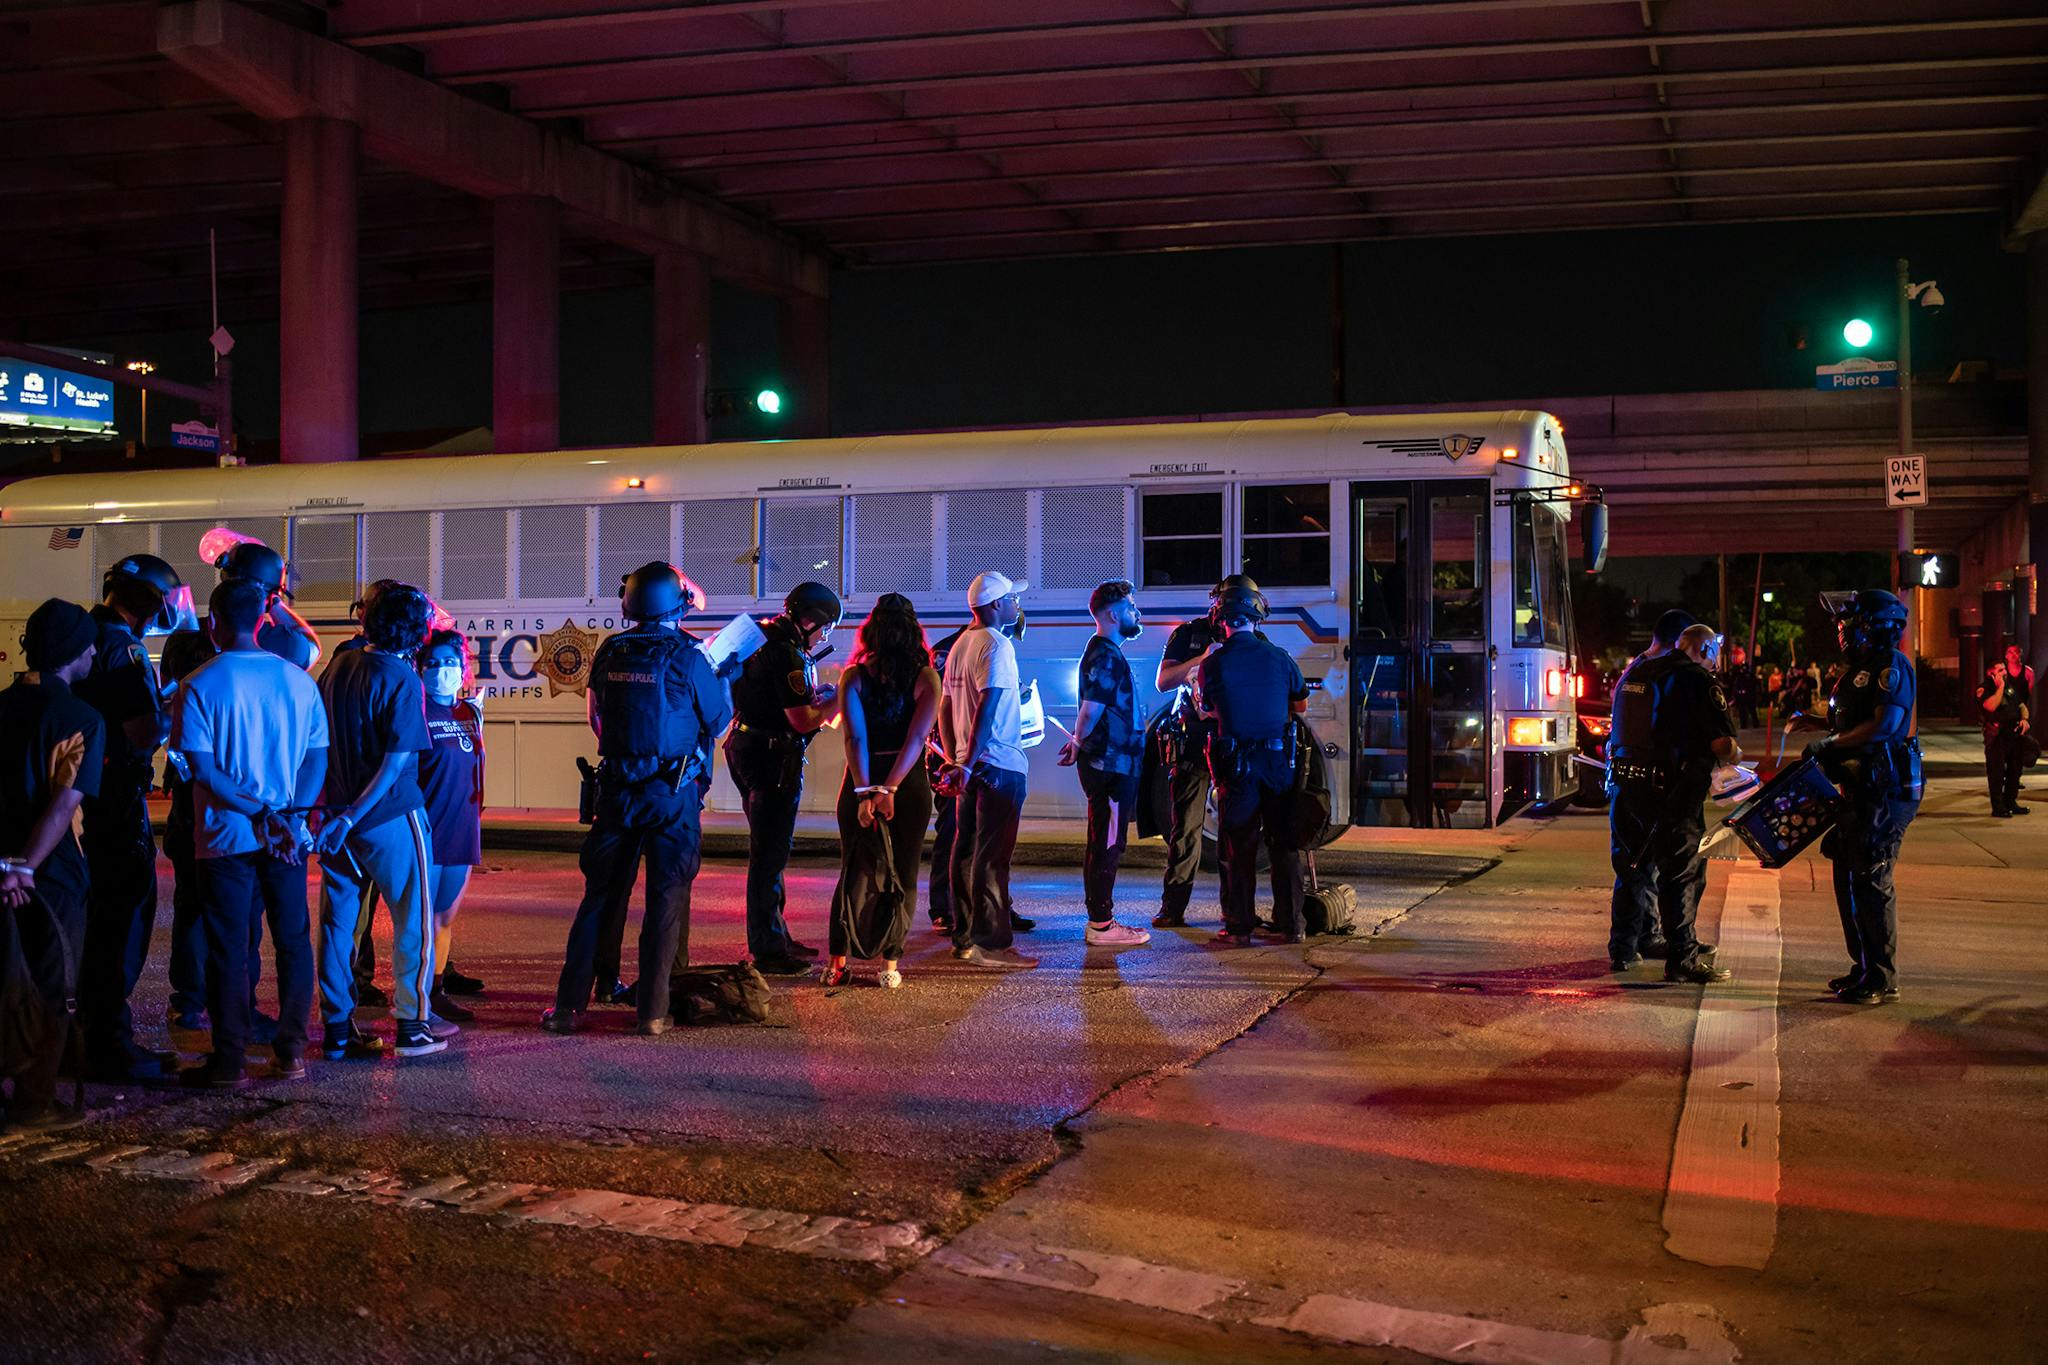 A group of people being placed under arrest stand by a Harris County Jail bus after protesters were apprehended in a fenced in area in Houston, on June 2, 2020.